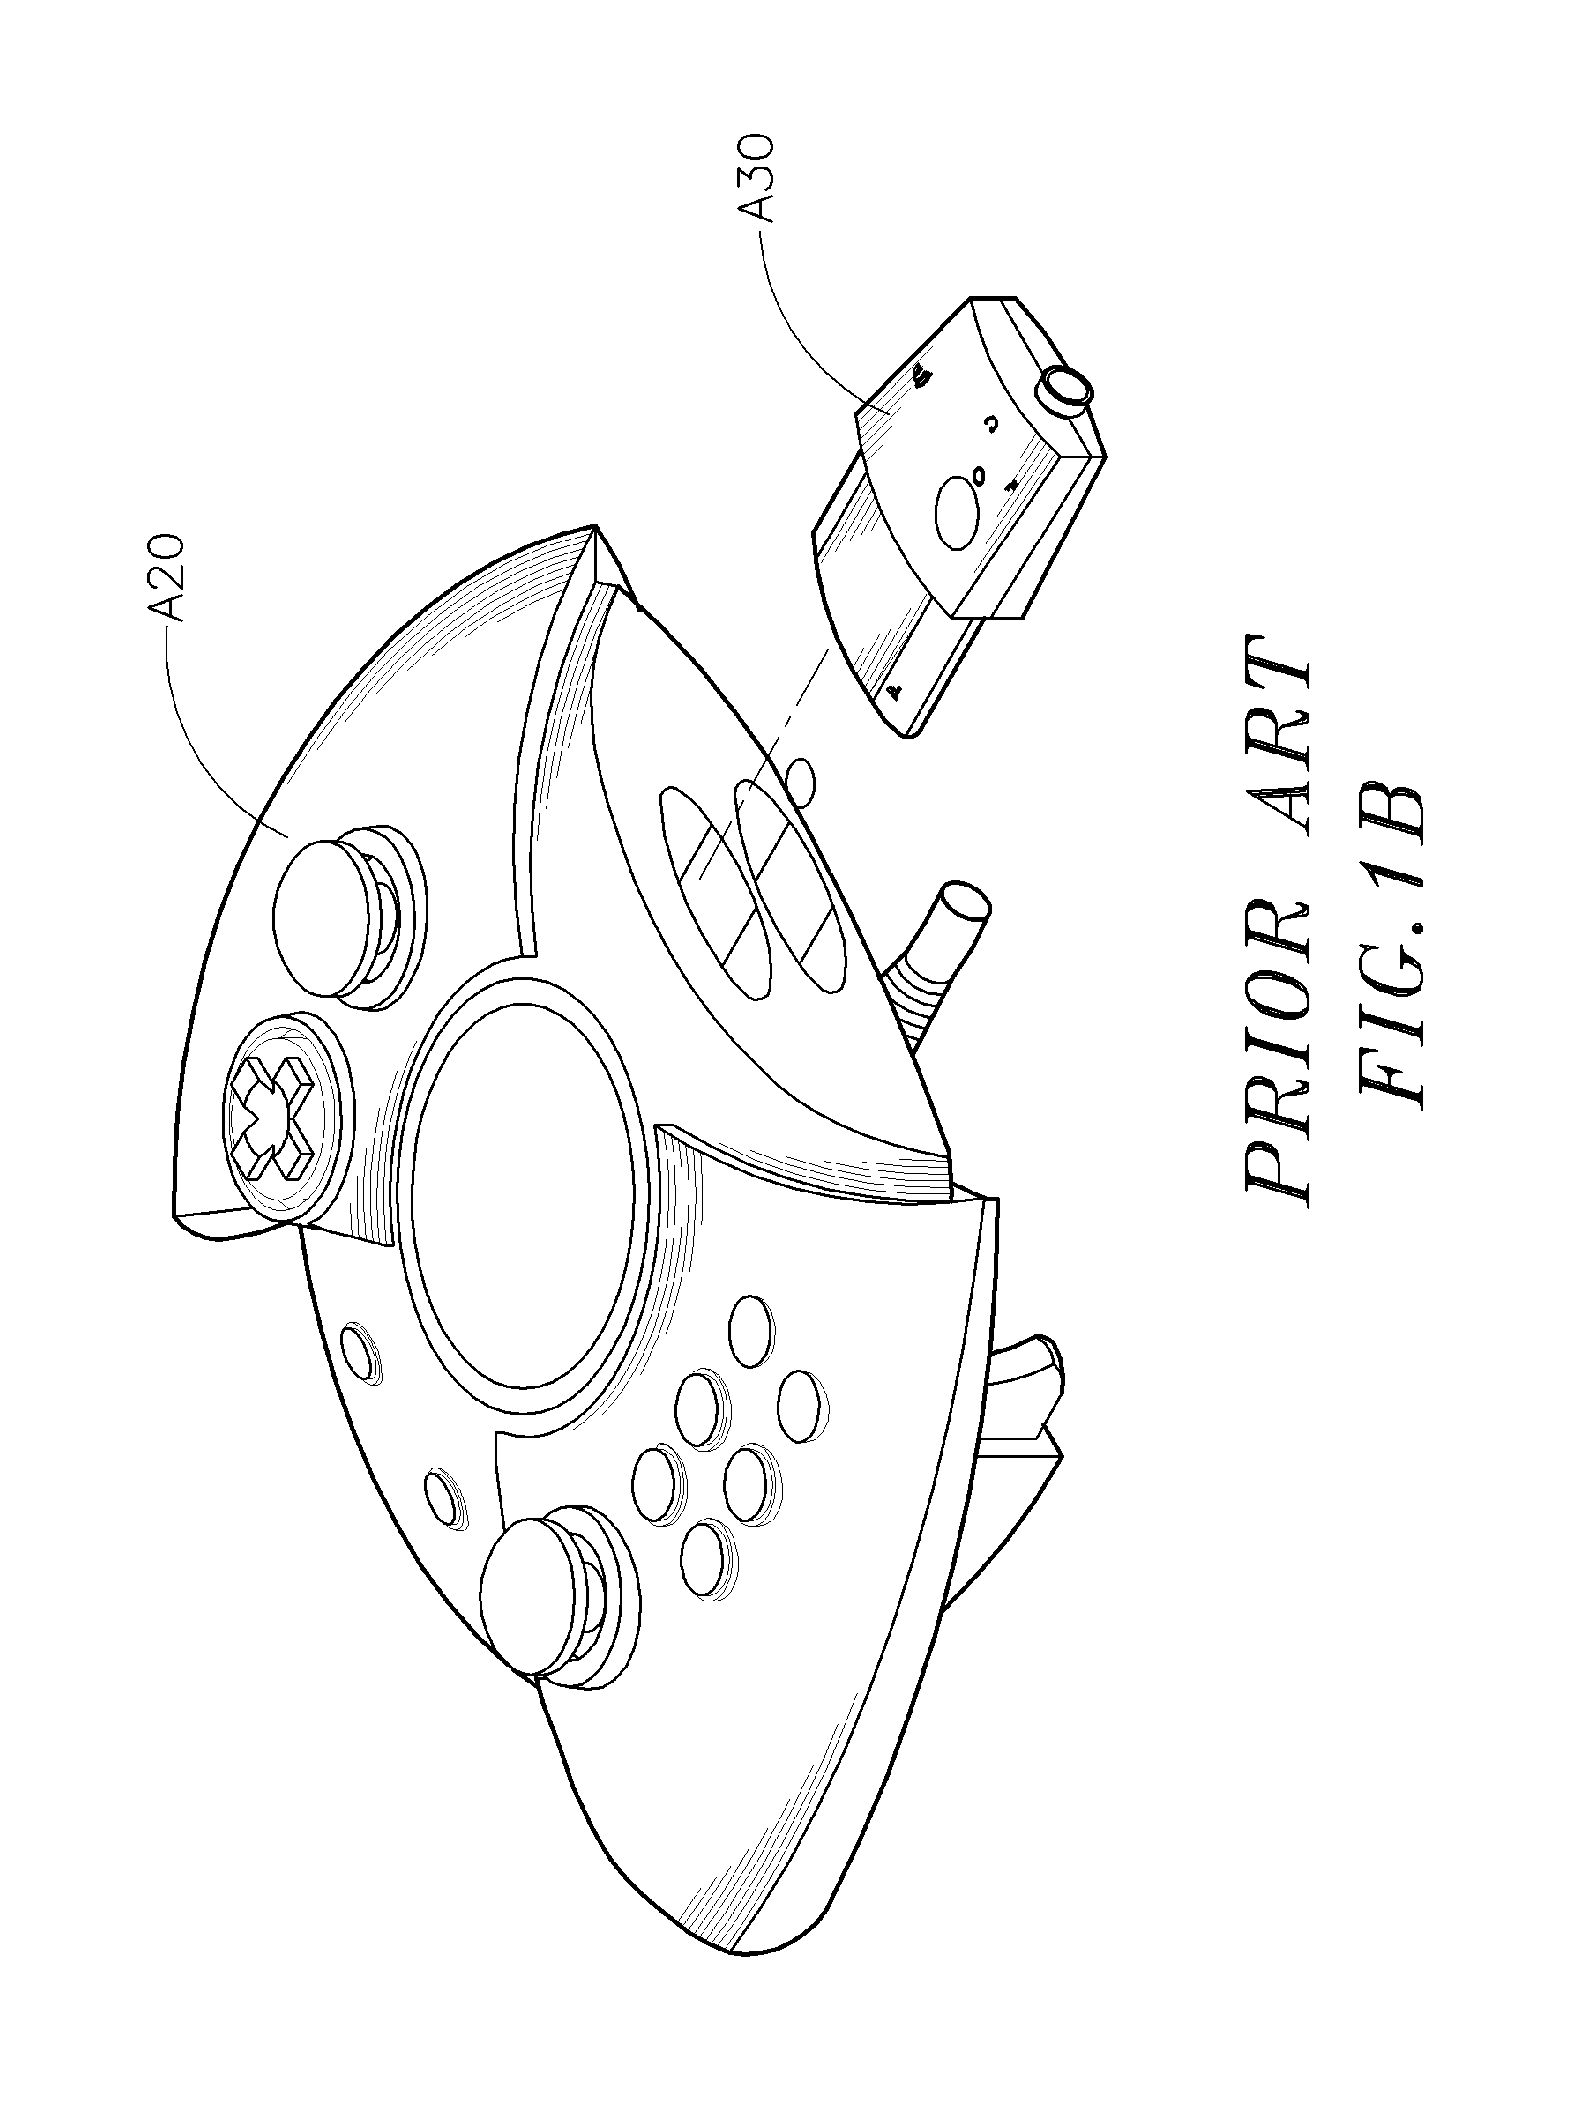 [wireless controller of a video game player]